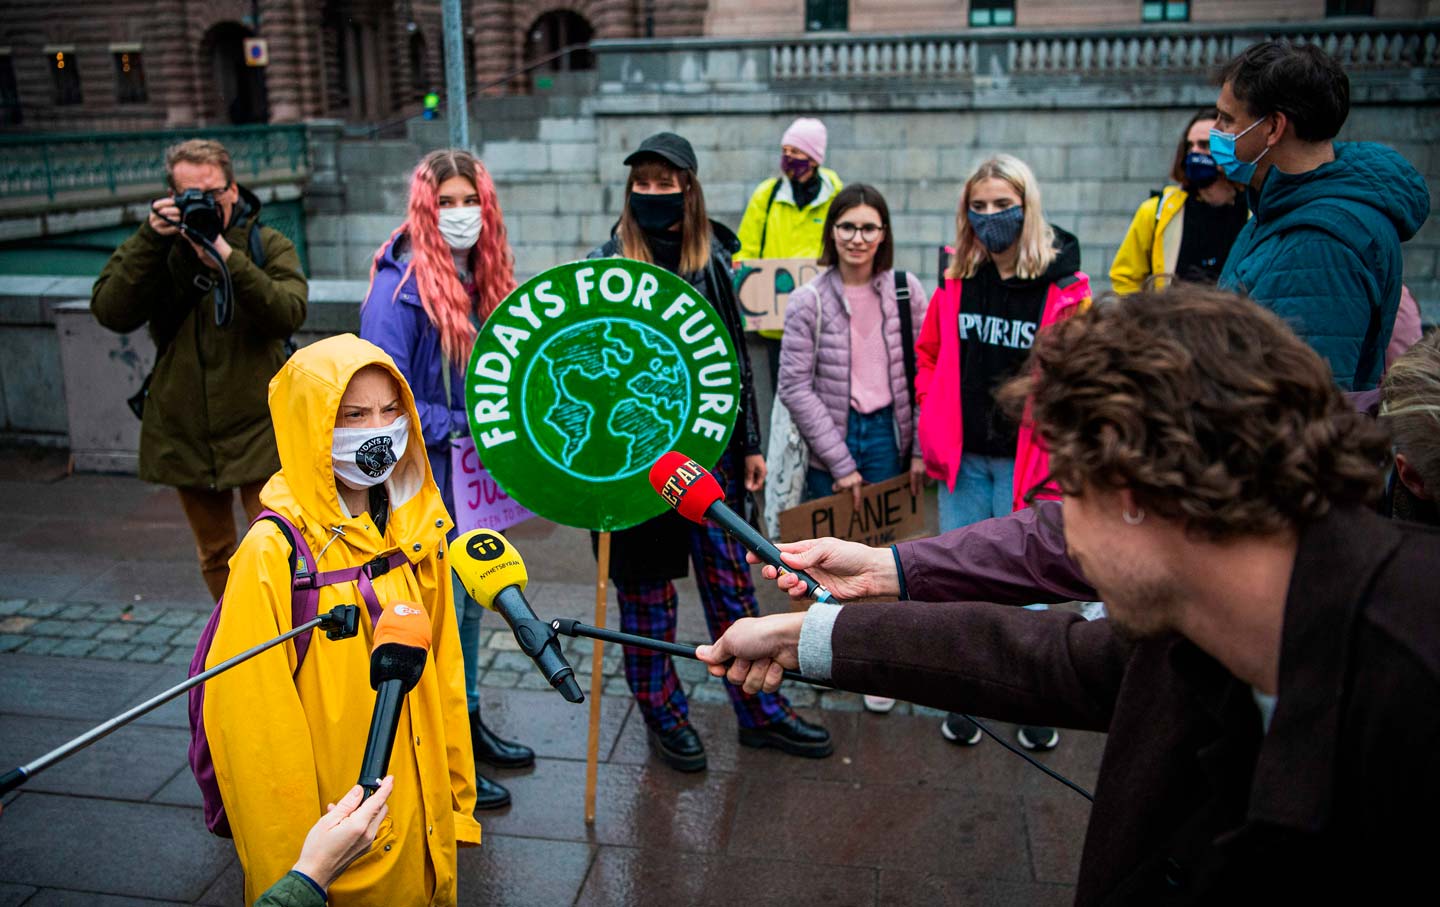 Covering Young Climate Activists Isn’t an Act of Favoritism—It’s an Act of Journalism